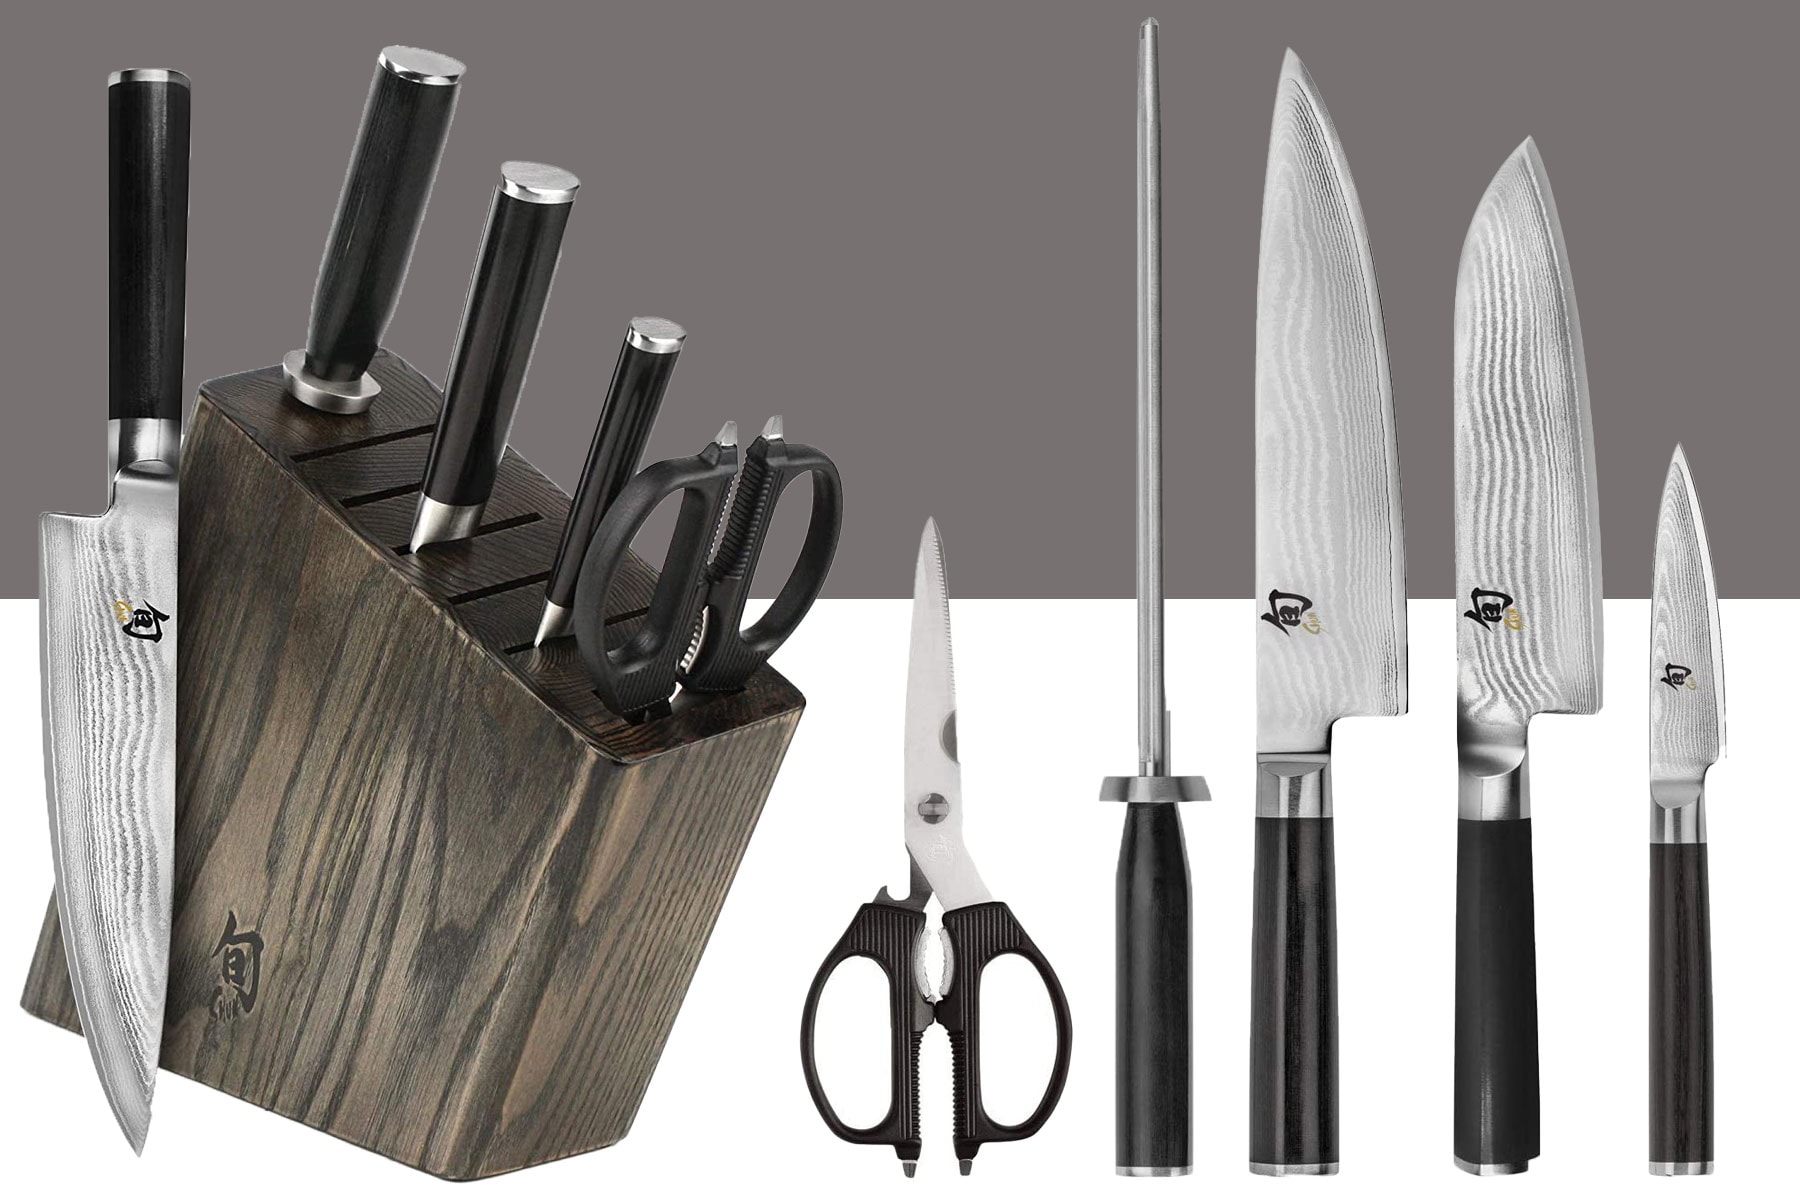 The Shun Classic 8-piece kitchen knife set shown with its wood storage block in front of a gray and white background.